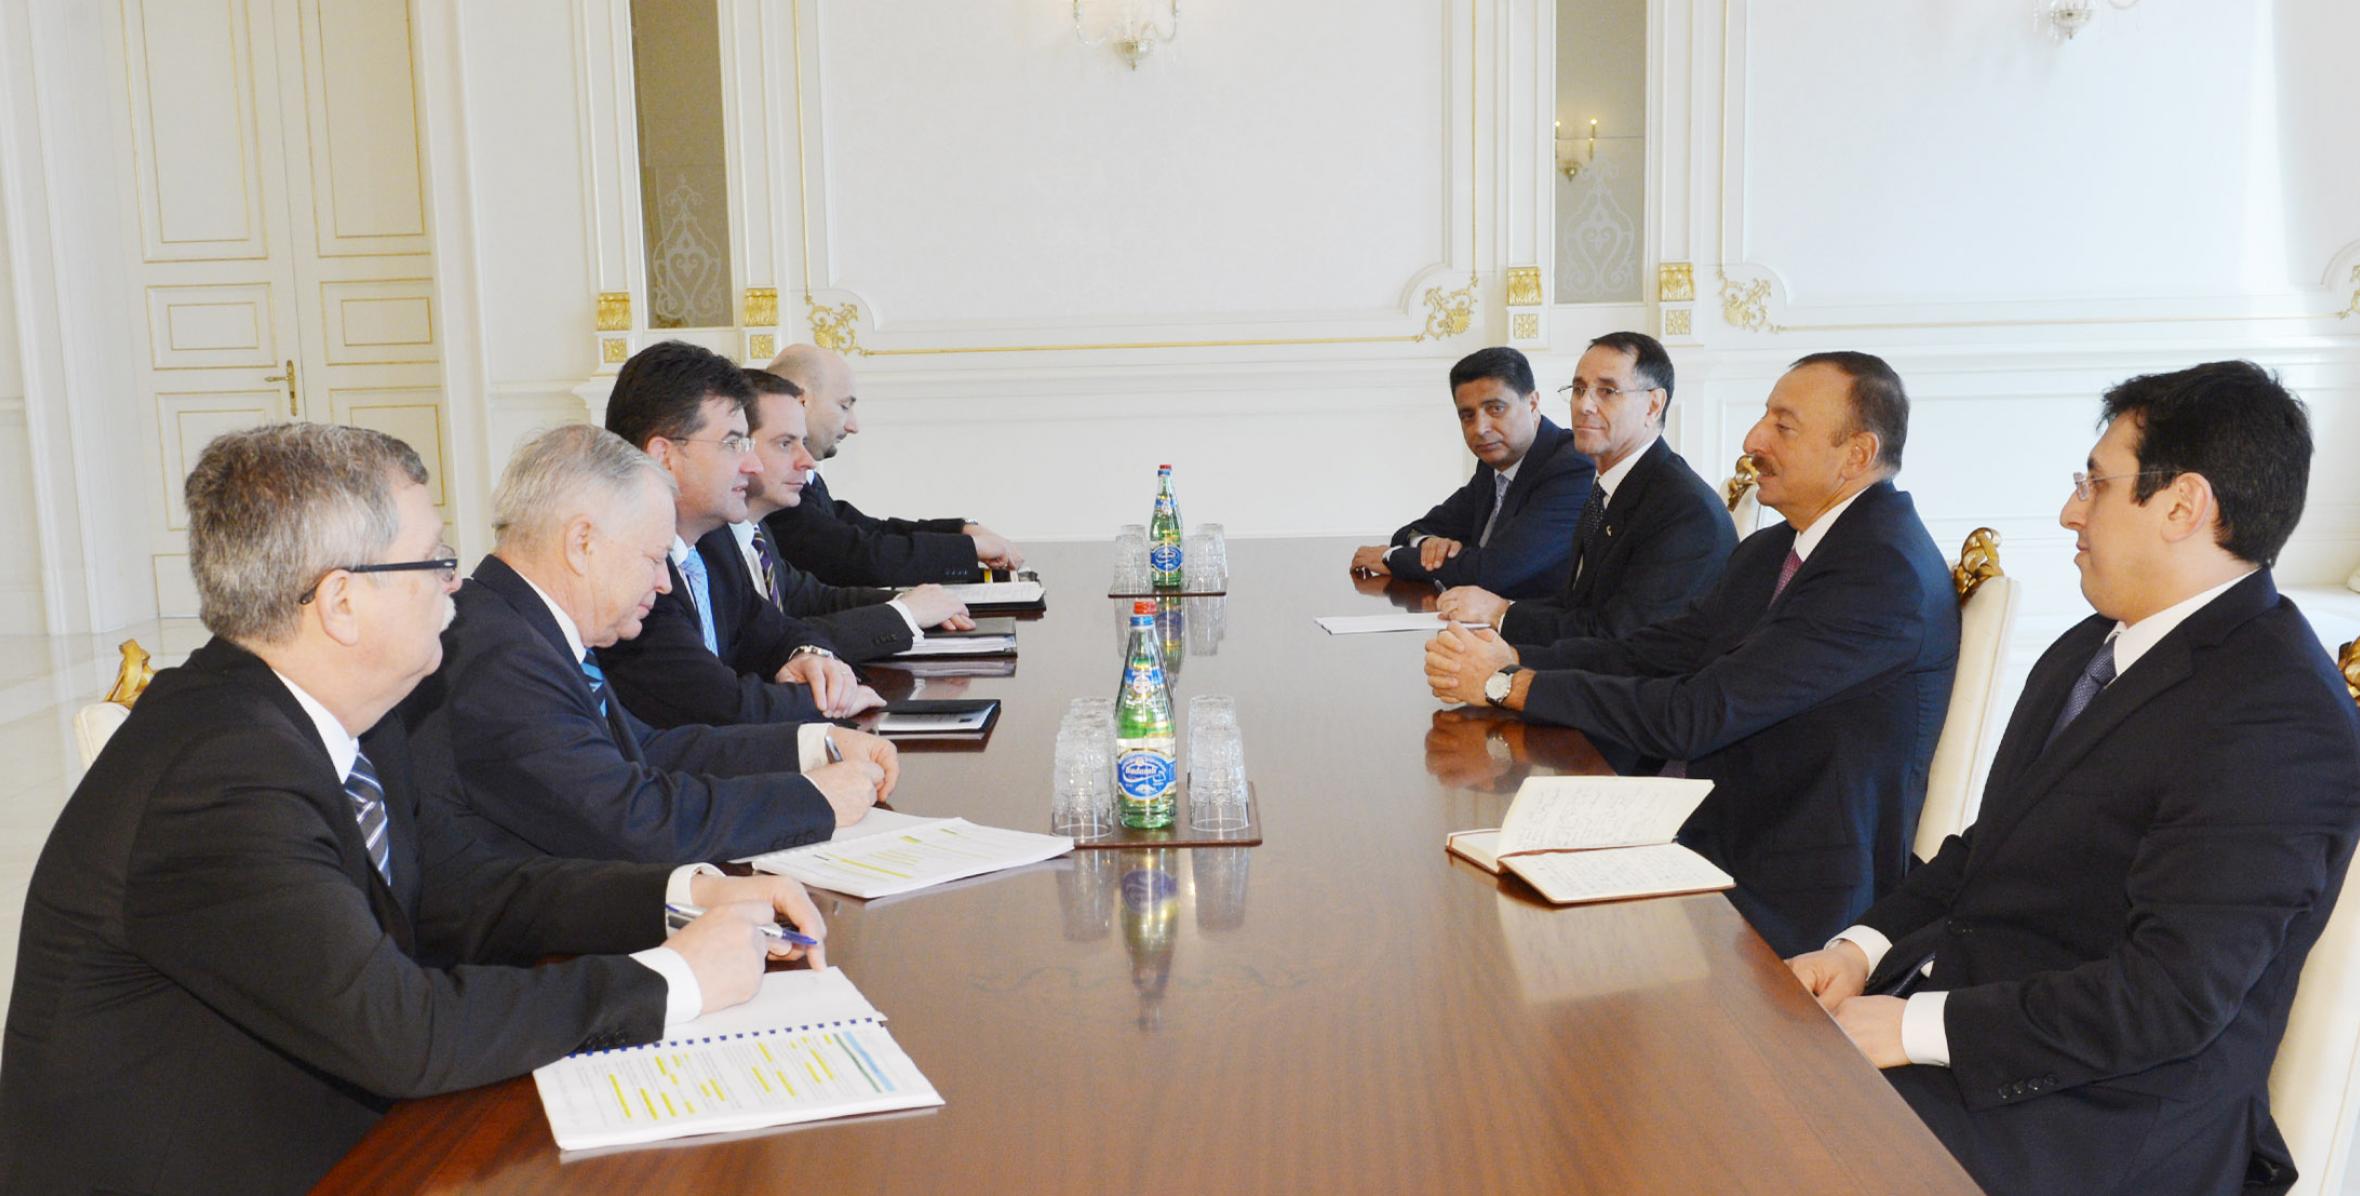 Ilham Aliyev received a delegation led by the Deputy Prime Minister and Minister of Foreign and European Affairs of the Slovak Republic